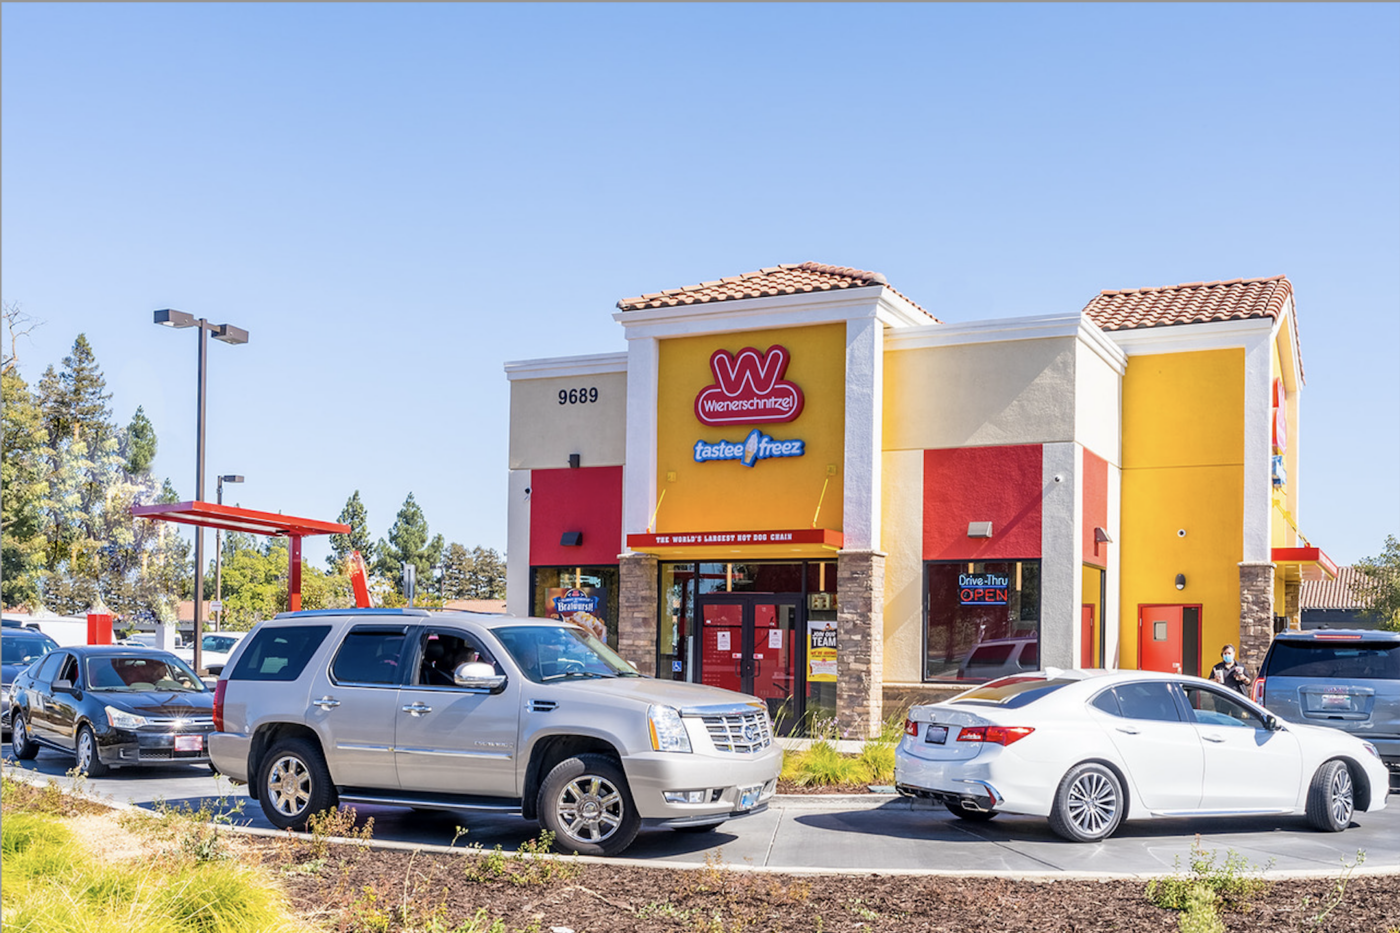 Learn more about how Wienerschnitzel is innovating our franchise business.